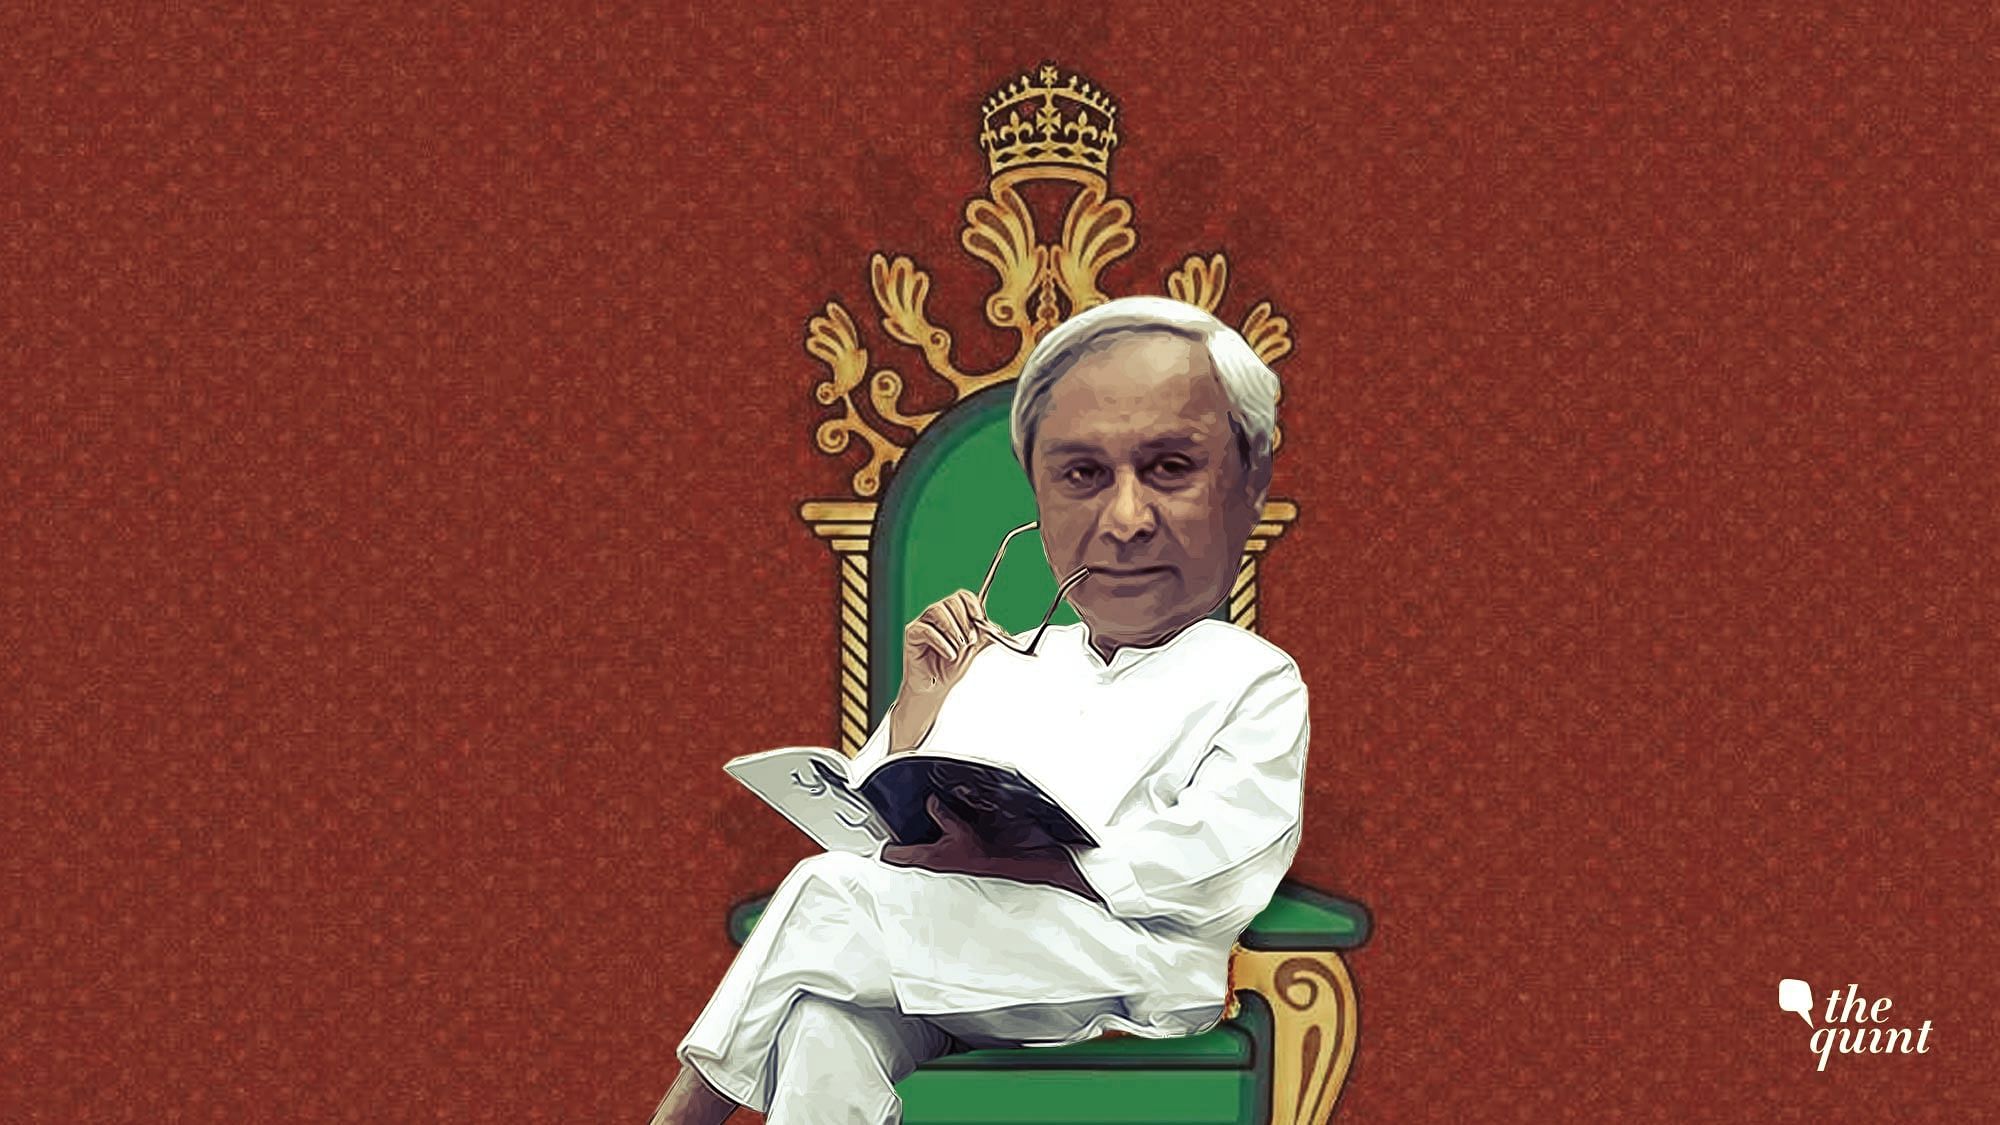 BJD’s Naveen Patnaik, who has held on to the chief minister’s chair for the last 19 years, has been unable to resolve the state’s employment divide.